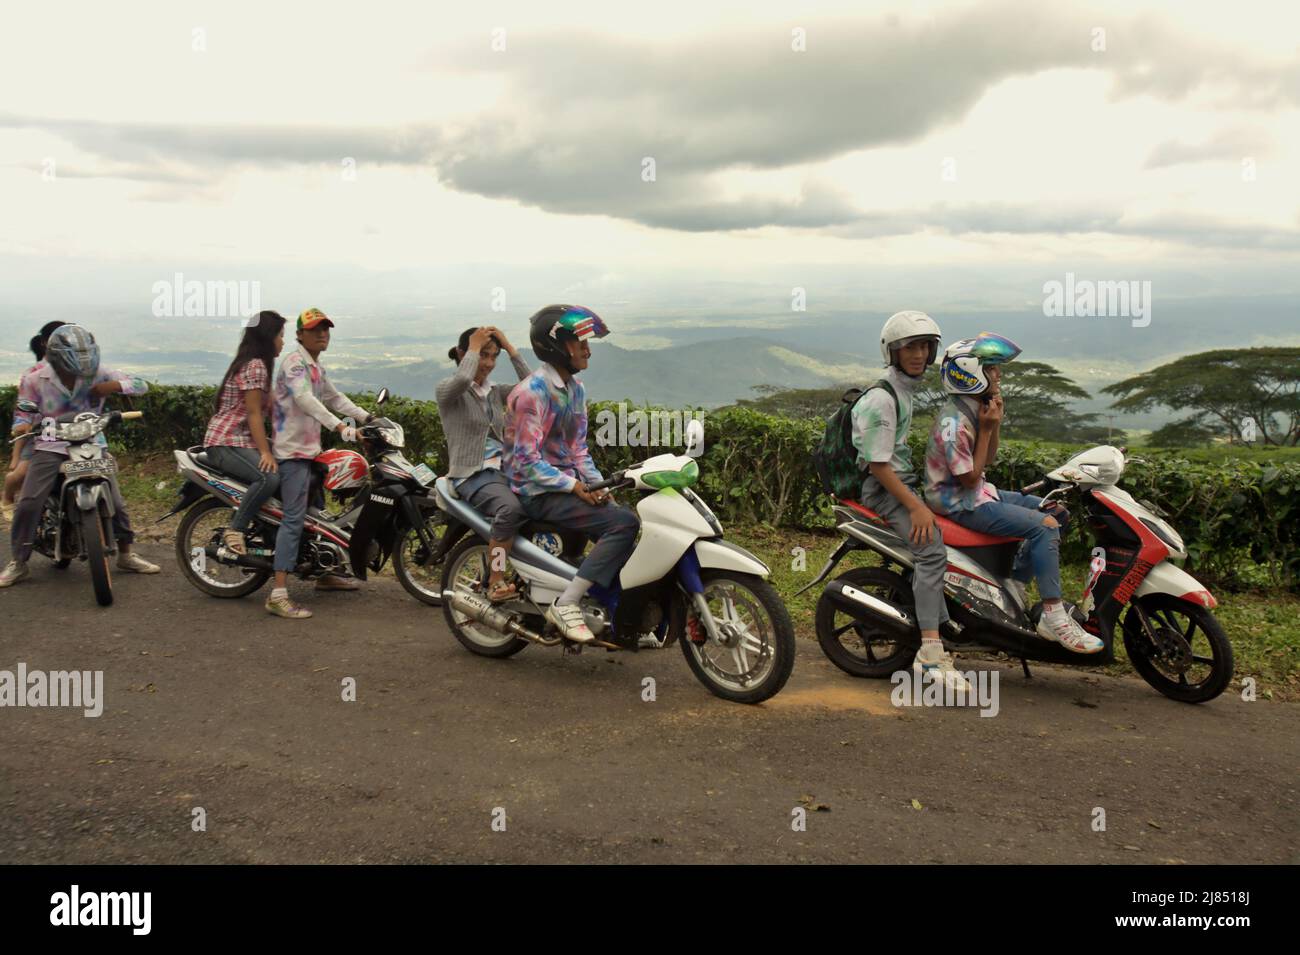 Portrait of high school students as they are celebrating their school graduation by riding through tea plantation in a convoy, wearing school uniforms that had been painted as a tradition, in Pagar Alam, South Sumatra, Indonesia. Stock Photo